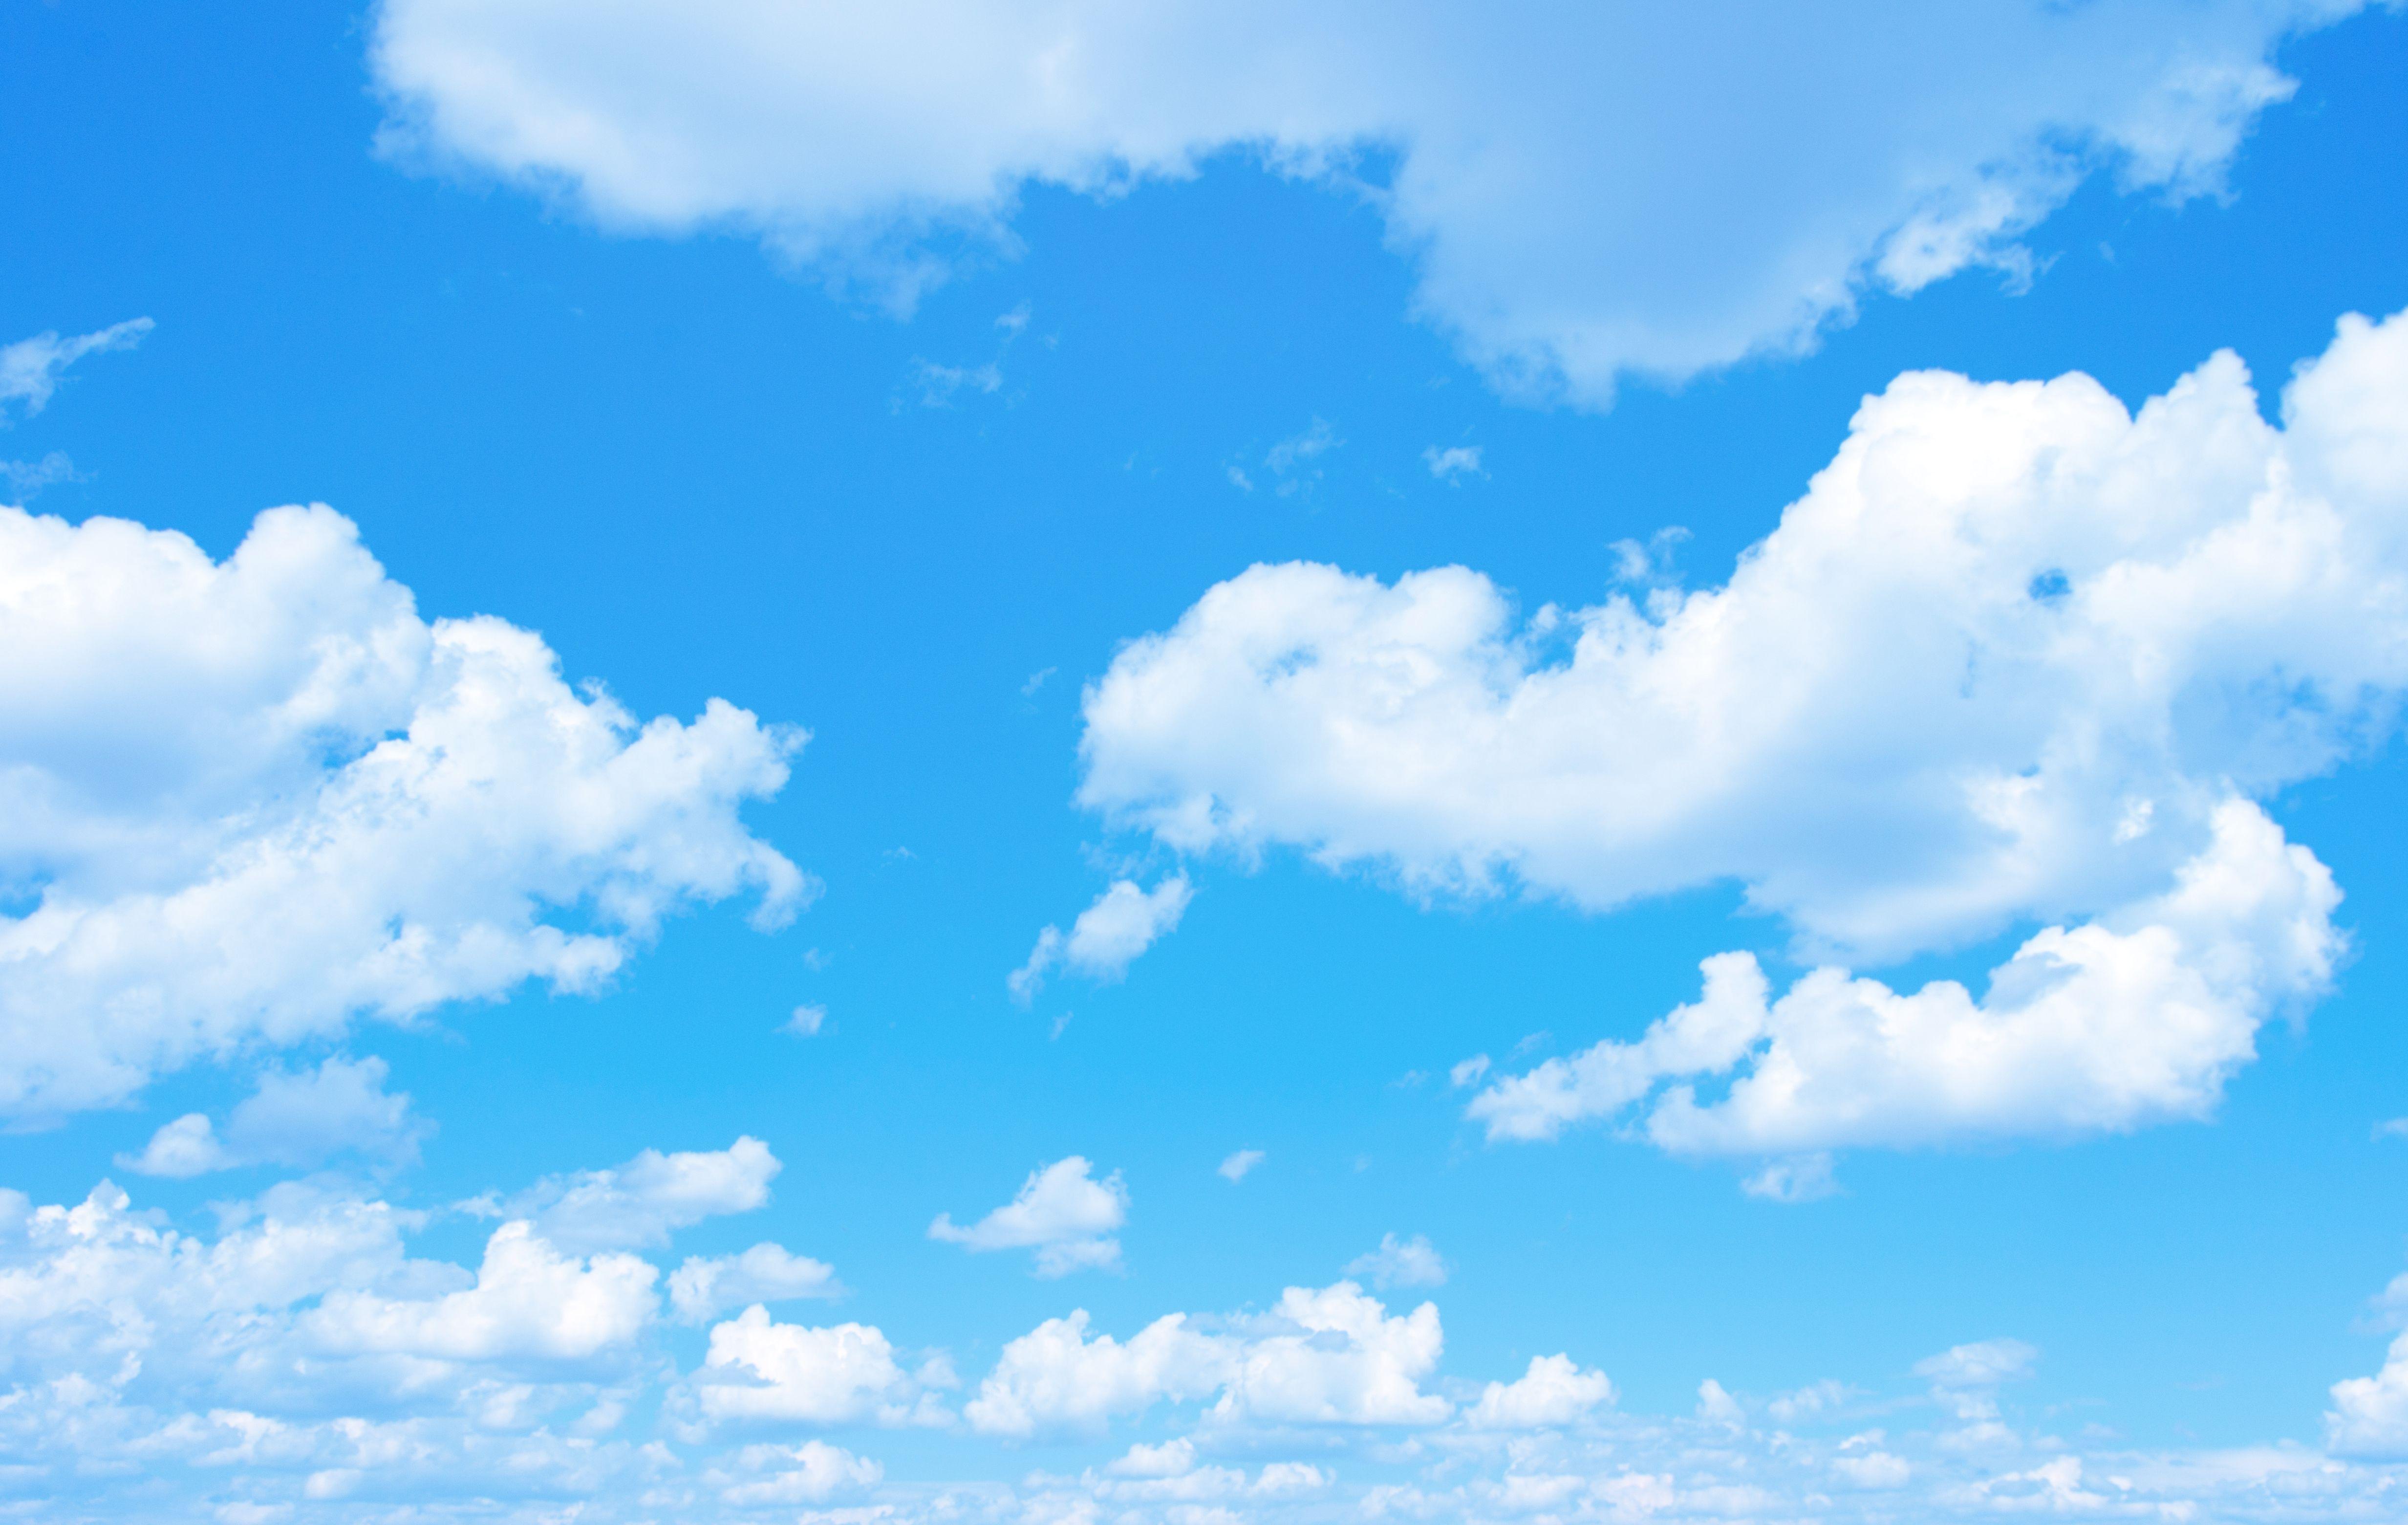 Wp Content Uploads 2014 11 Bigstock Blue Sky Background With A Tin 566847. Blue Sky Wallpaper, Blue Sky Clouds, Blue Sky Photography